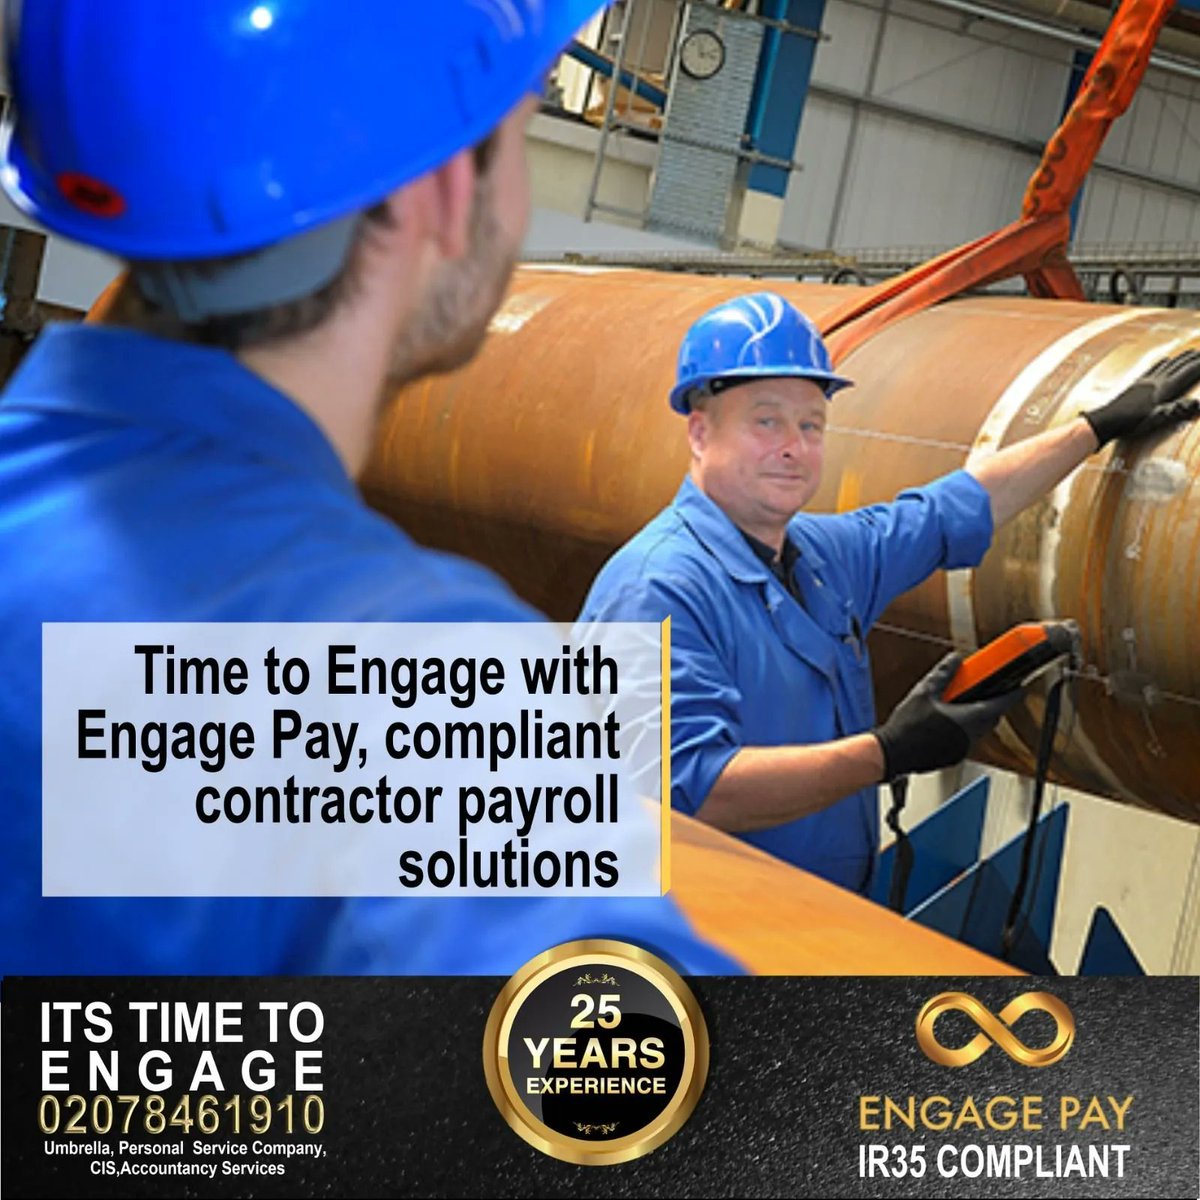 Our Engineering contractors know their payroll is in capable hands with Engage Pay!

We ensure that we issue timely and accurate payroll to all of our contractors.

#essexjobs #manchesterjobs #contractors #ir35 #loancharge #londonjobs #contractorjobs #recruiters #birminghamjobs